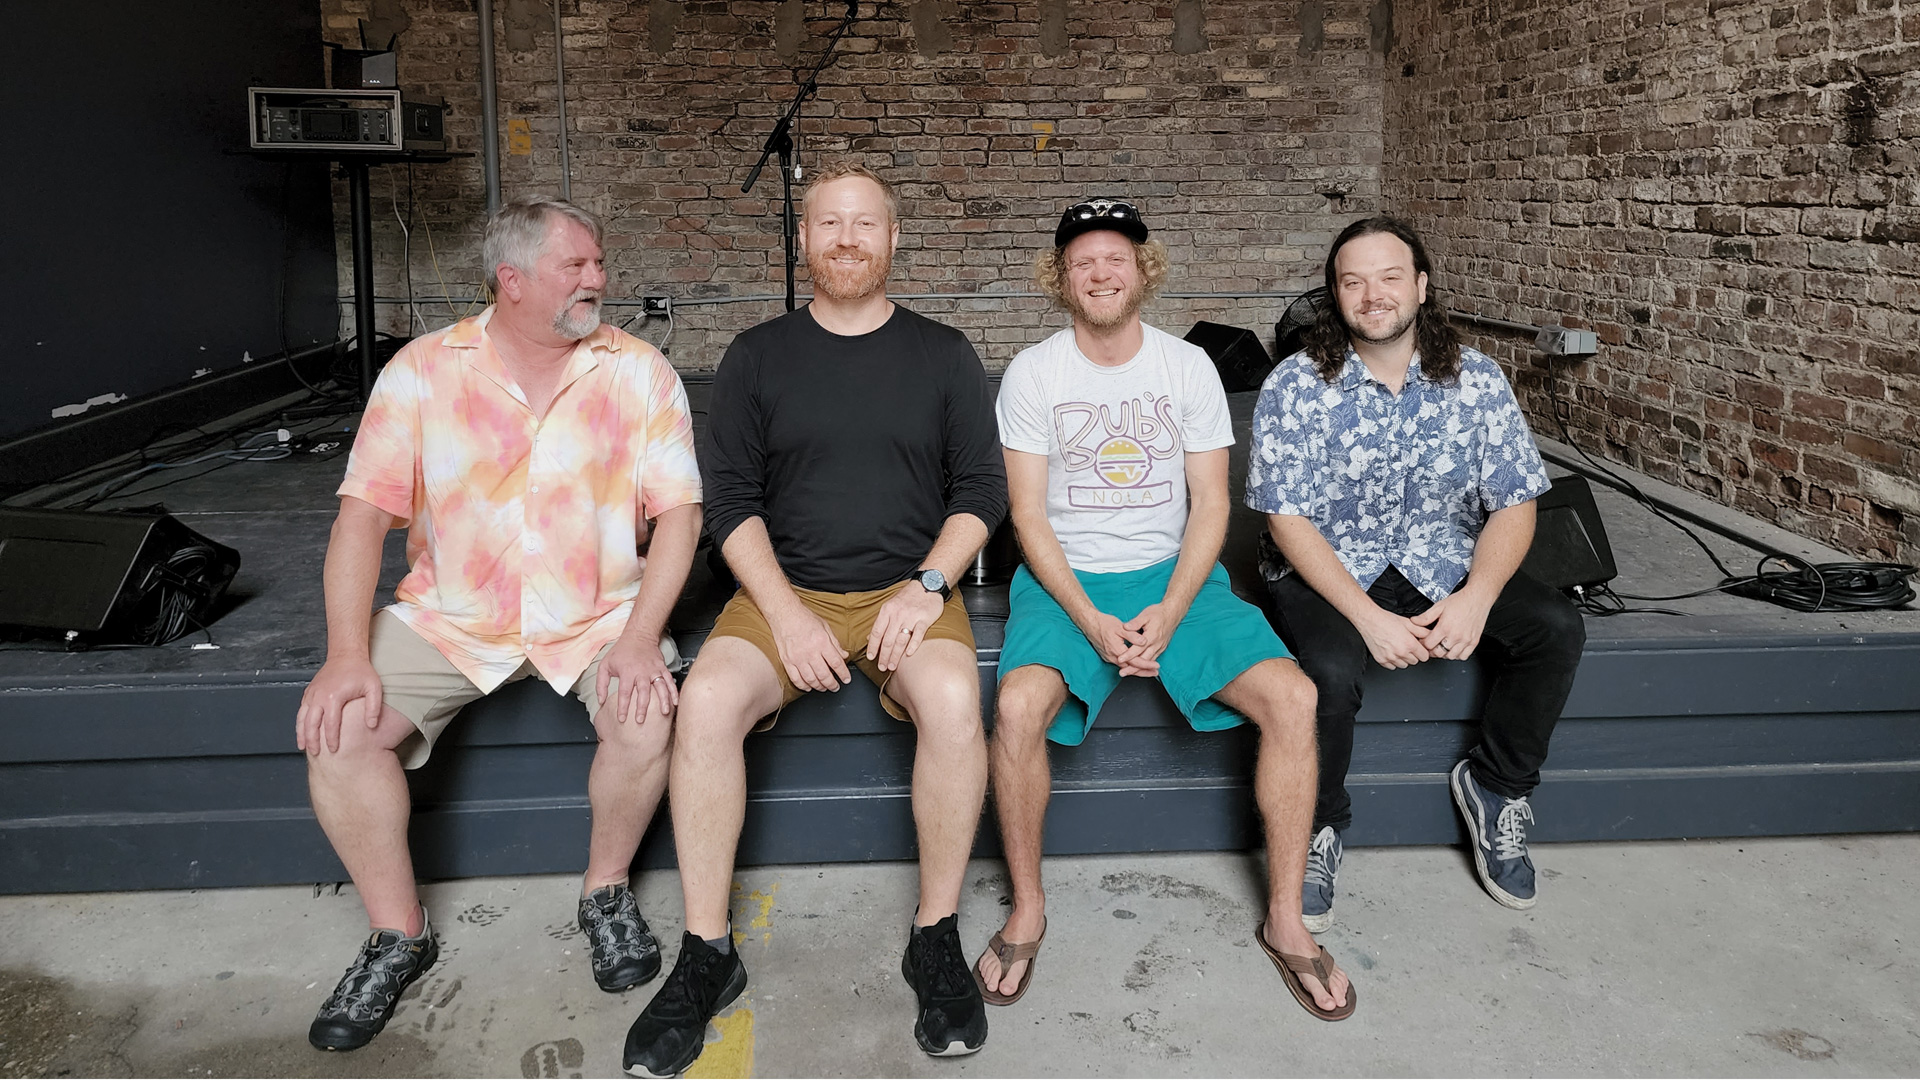 The NOLADrinks Show with Bryan Dias – Live Music Returning to NOLA and Frenchmen Street – 2022Ep19 – Bryan Dias of The NOLADrinks Show, Patrick Williams of Midnight Revival, Andrew Portwood of Fox Pocket, and Duane Bartels of the Duane Bartels Band at Midnight Revival.